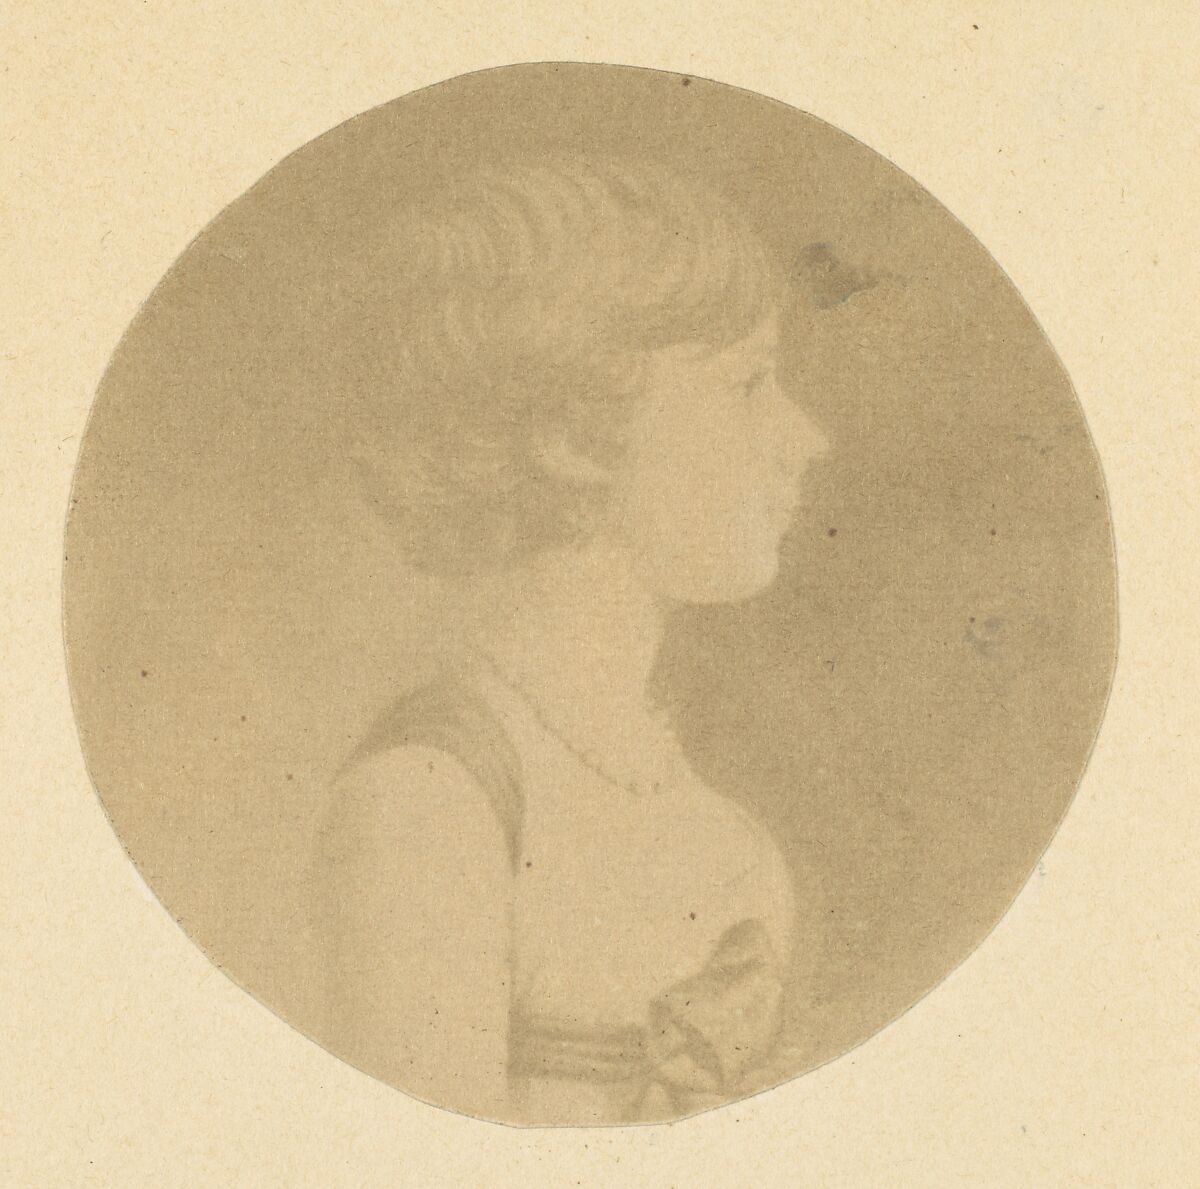 [Mezzotint portrait of a Girl in Profile, from The St. Memin Collection of Portraits], Jeremiah Gurney (American, 1812–1895 Coxsackie, New York), Salted paper print 